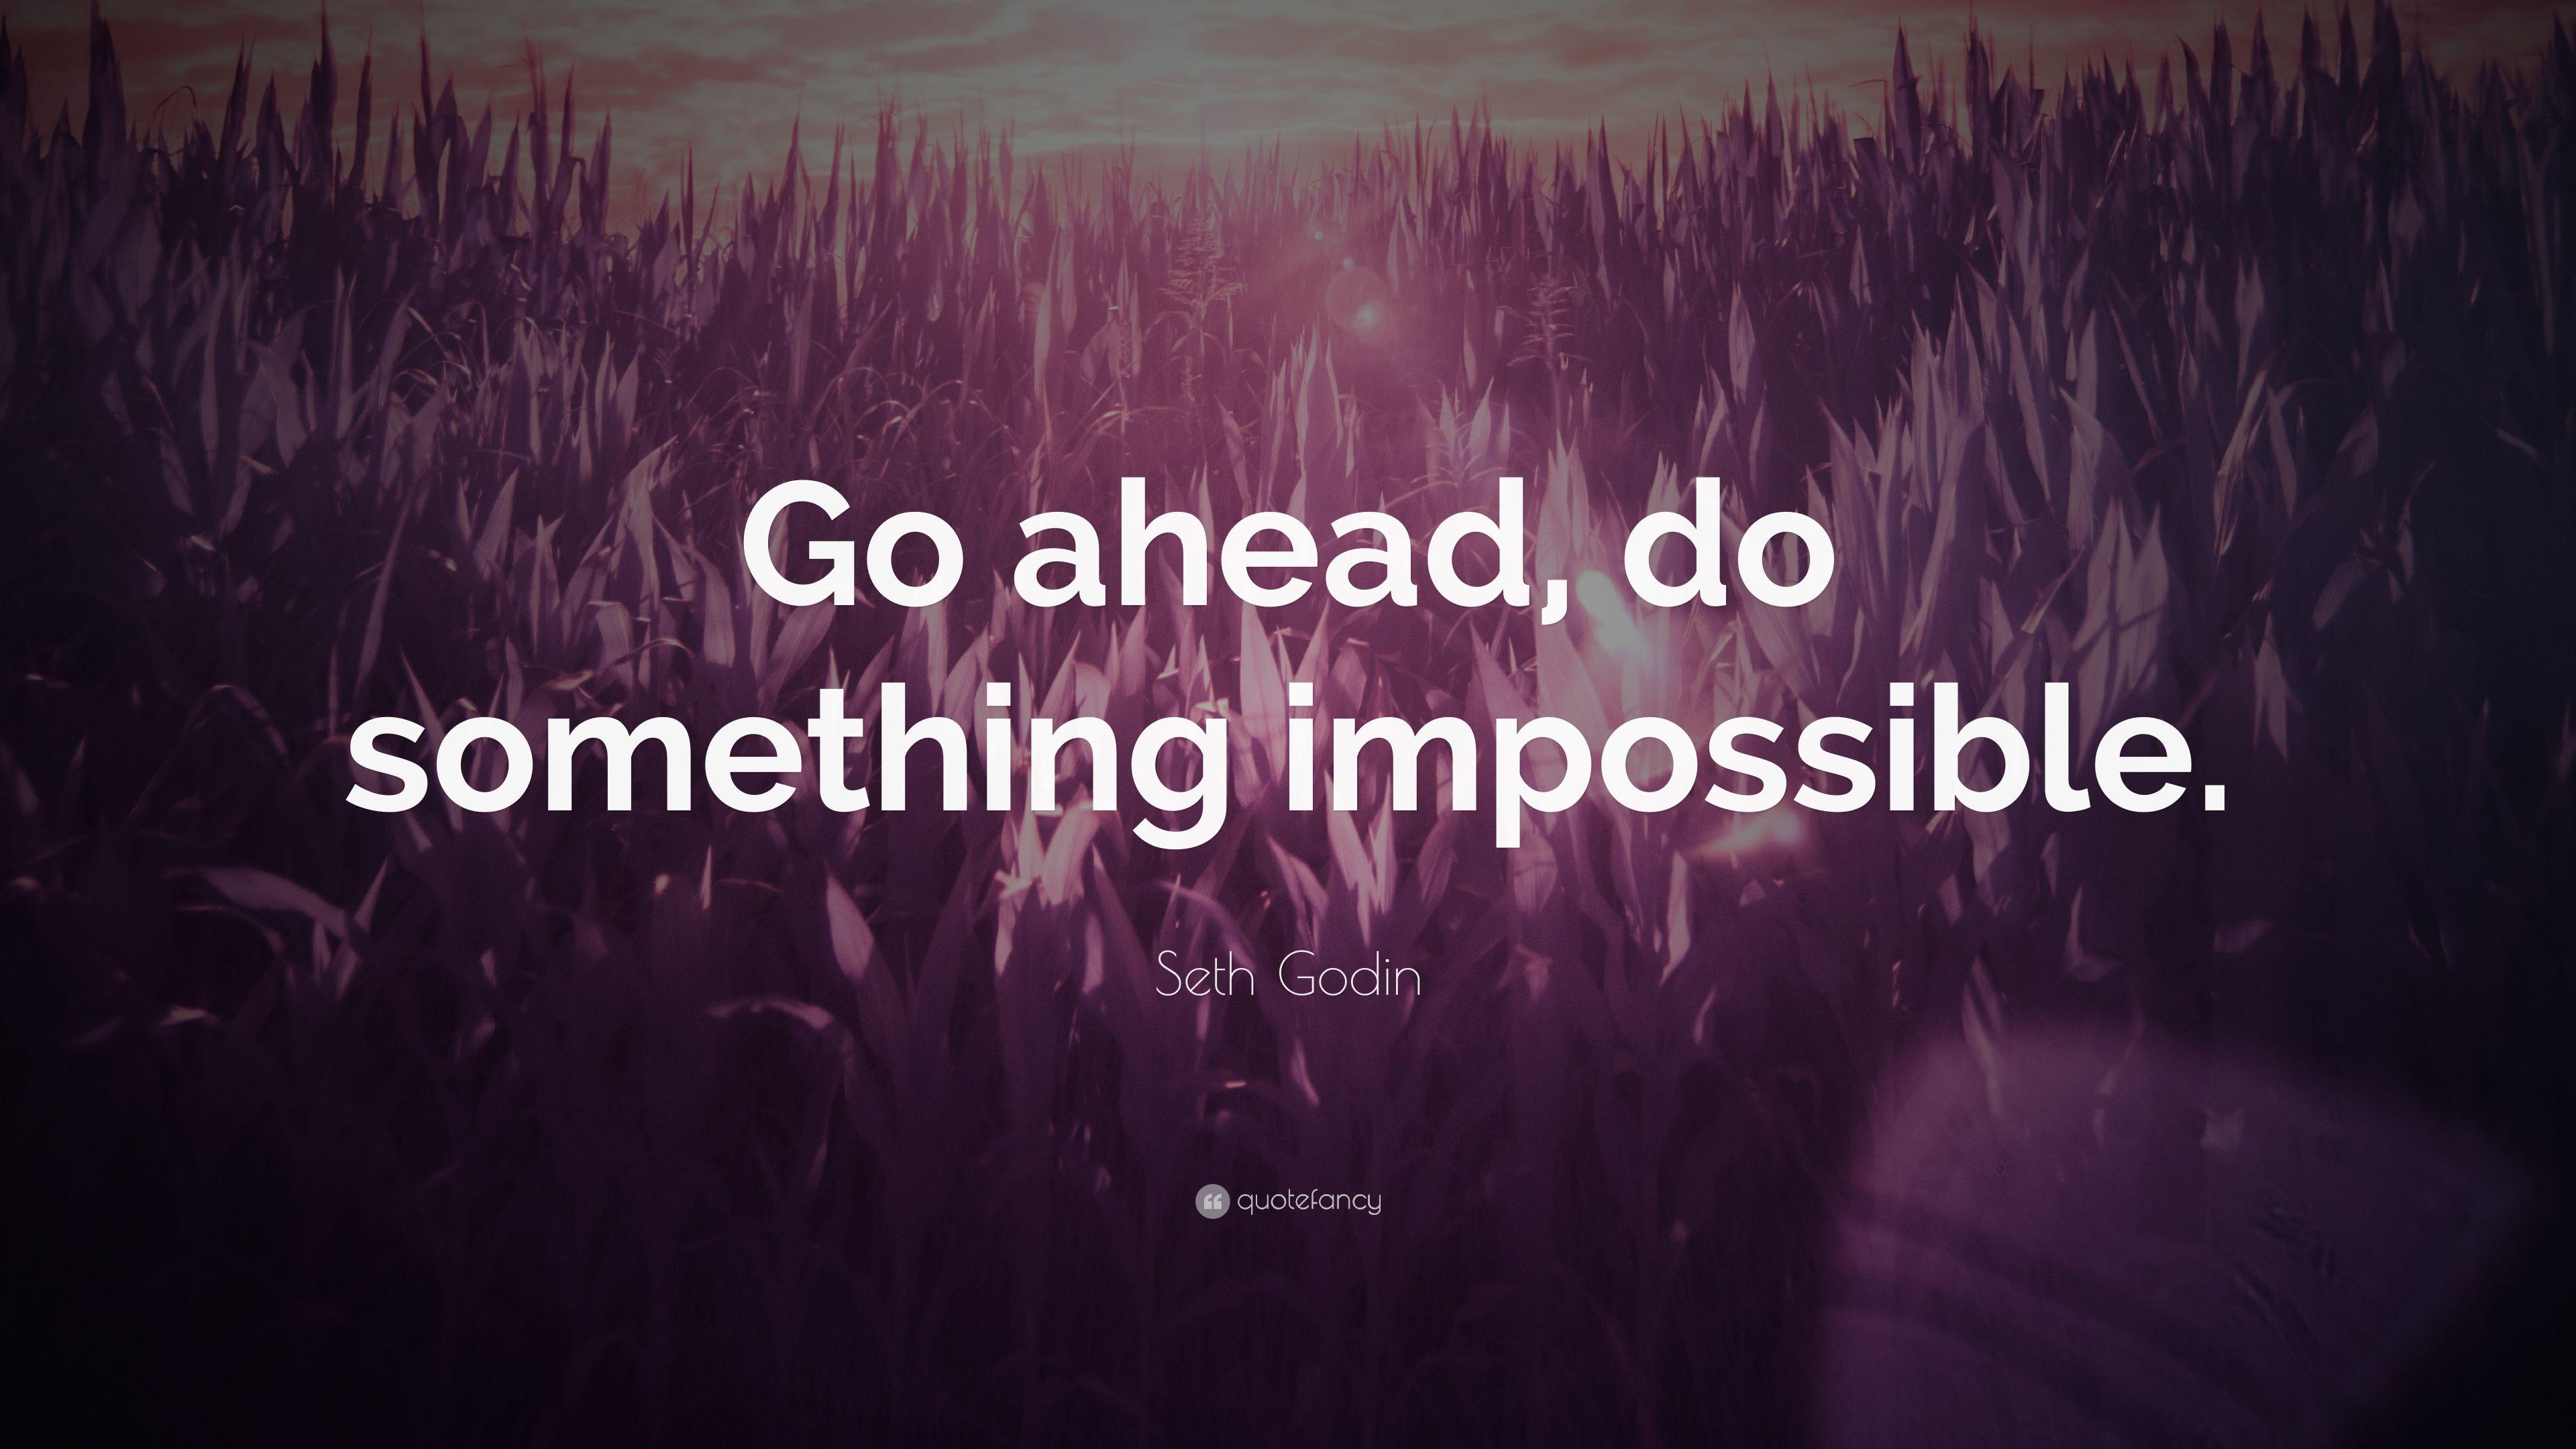 Seth Godin Quote: “Go ahead, do something impossible.” (12 wallpaper)